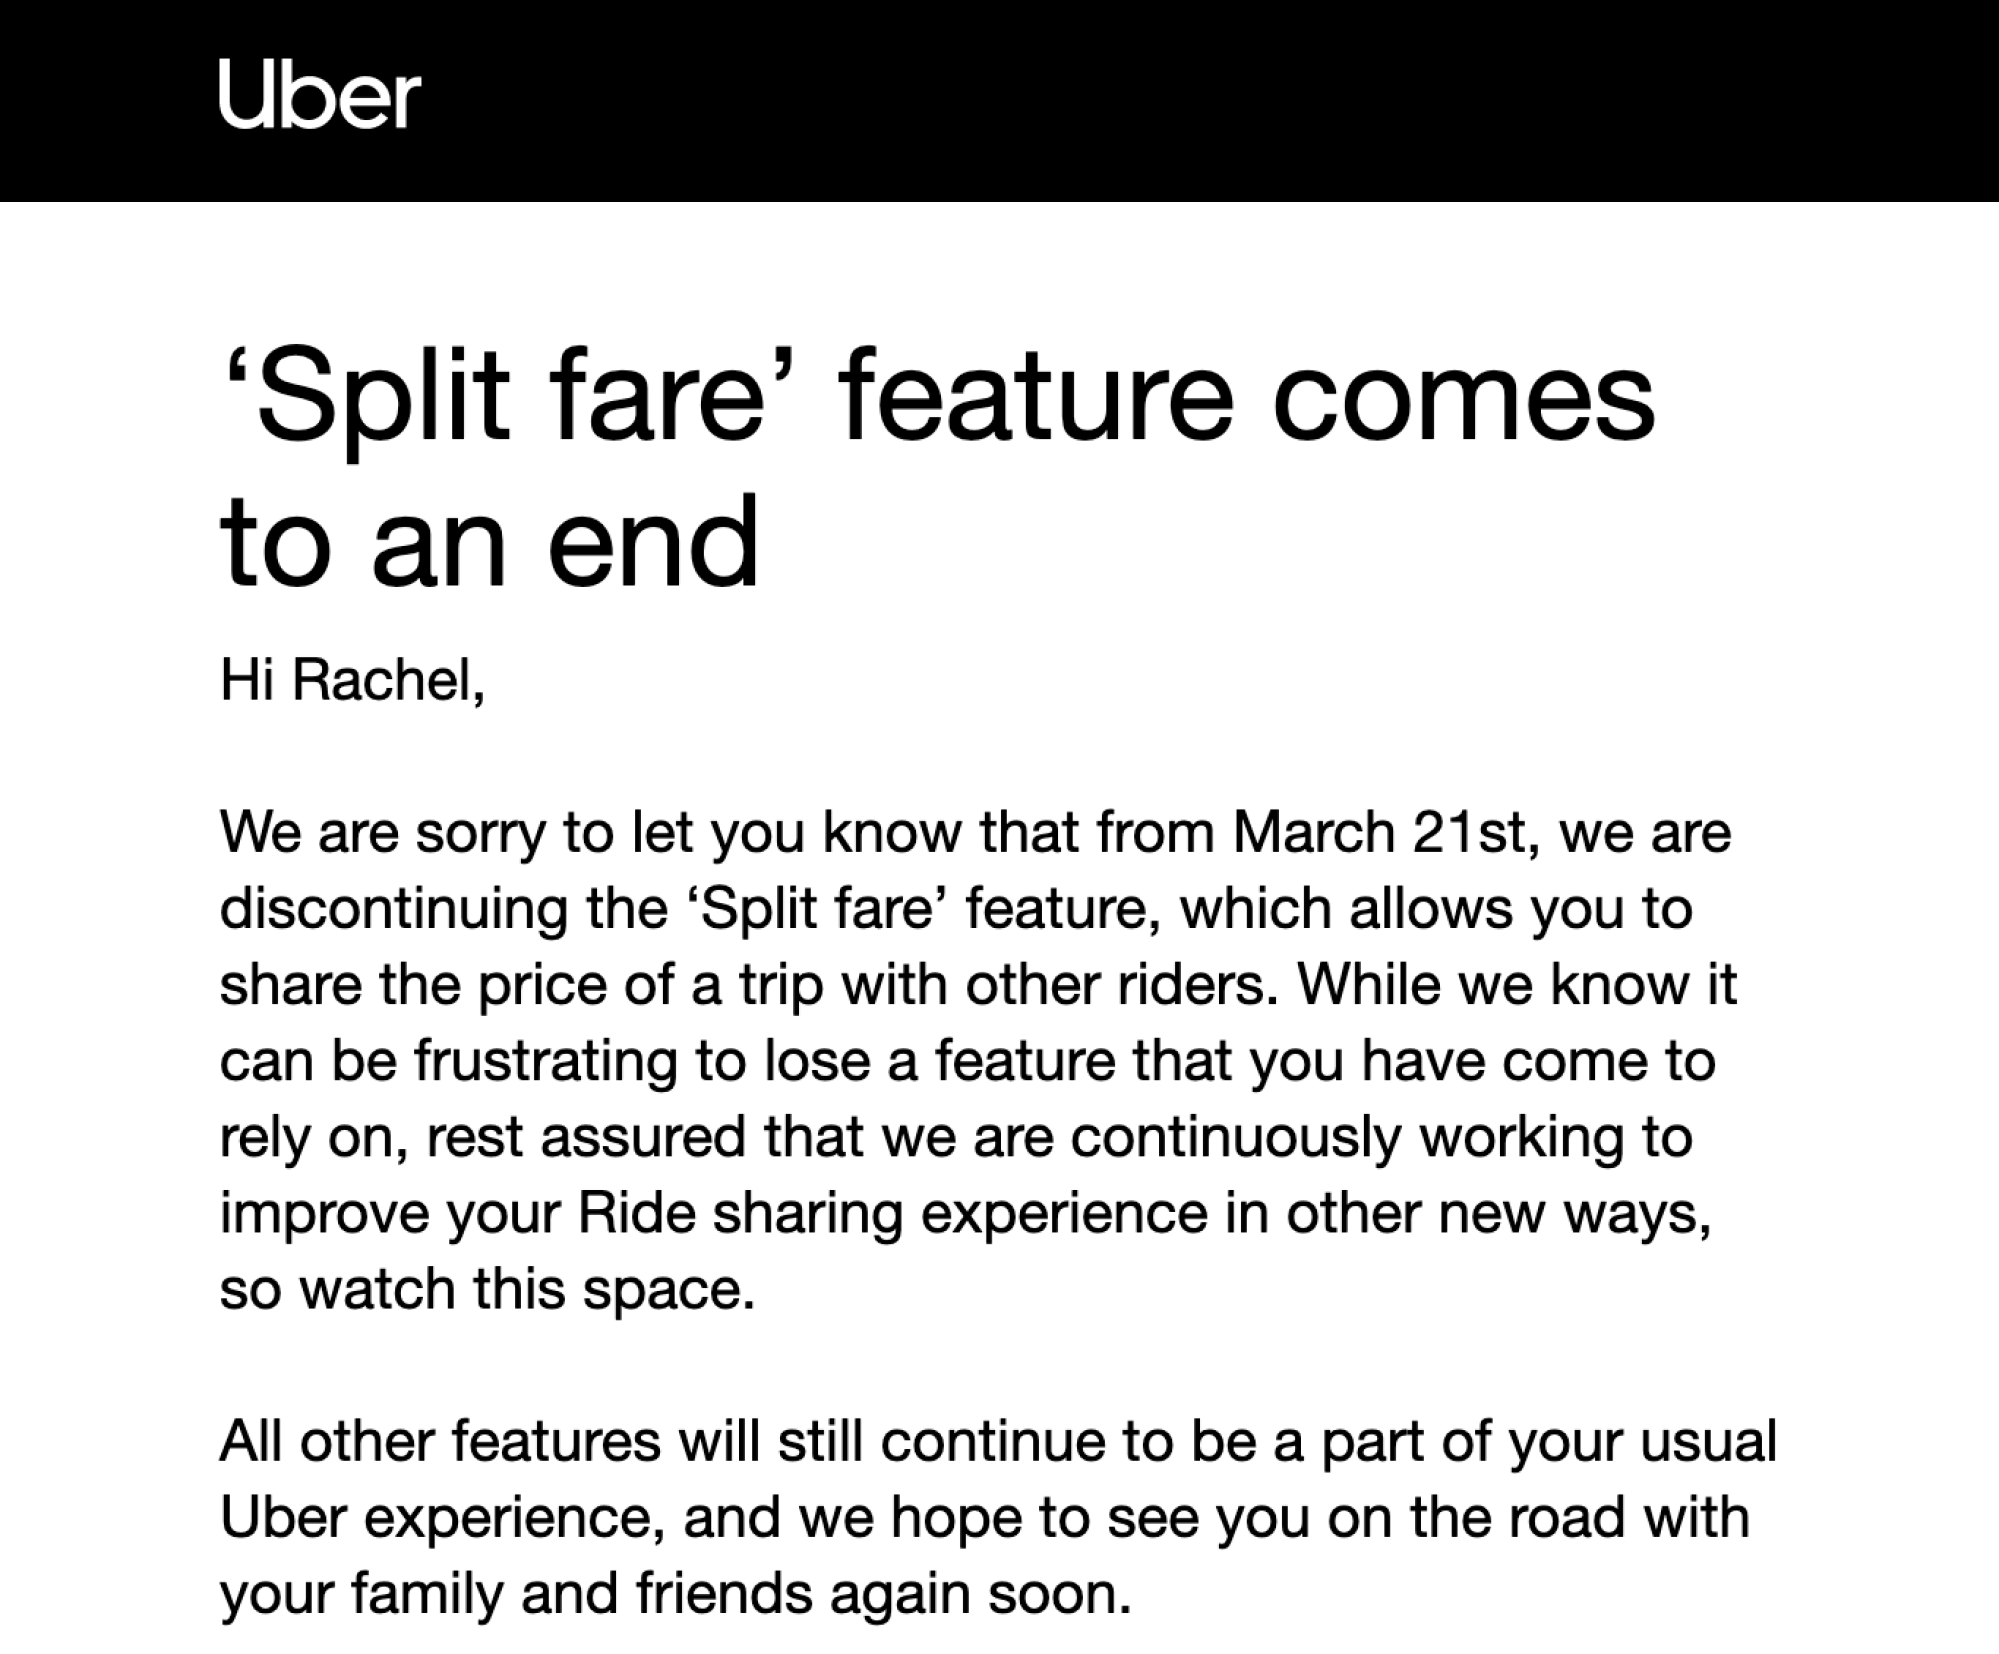 Screenshot of an email entitled "Split fare’ feature comes to an end" which begins as follows: "We are sorry to let you know that from March 21st, we are discontinuing the ‘Split fare’ feature, which allows you to share the price of a trip with other riders."